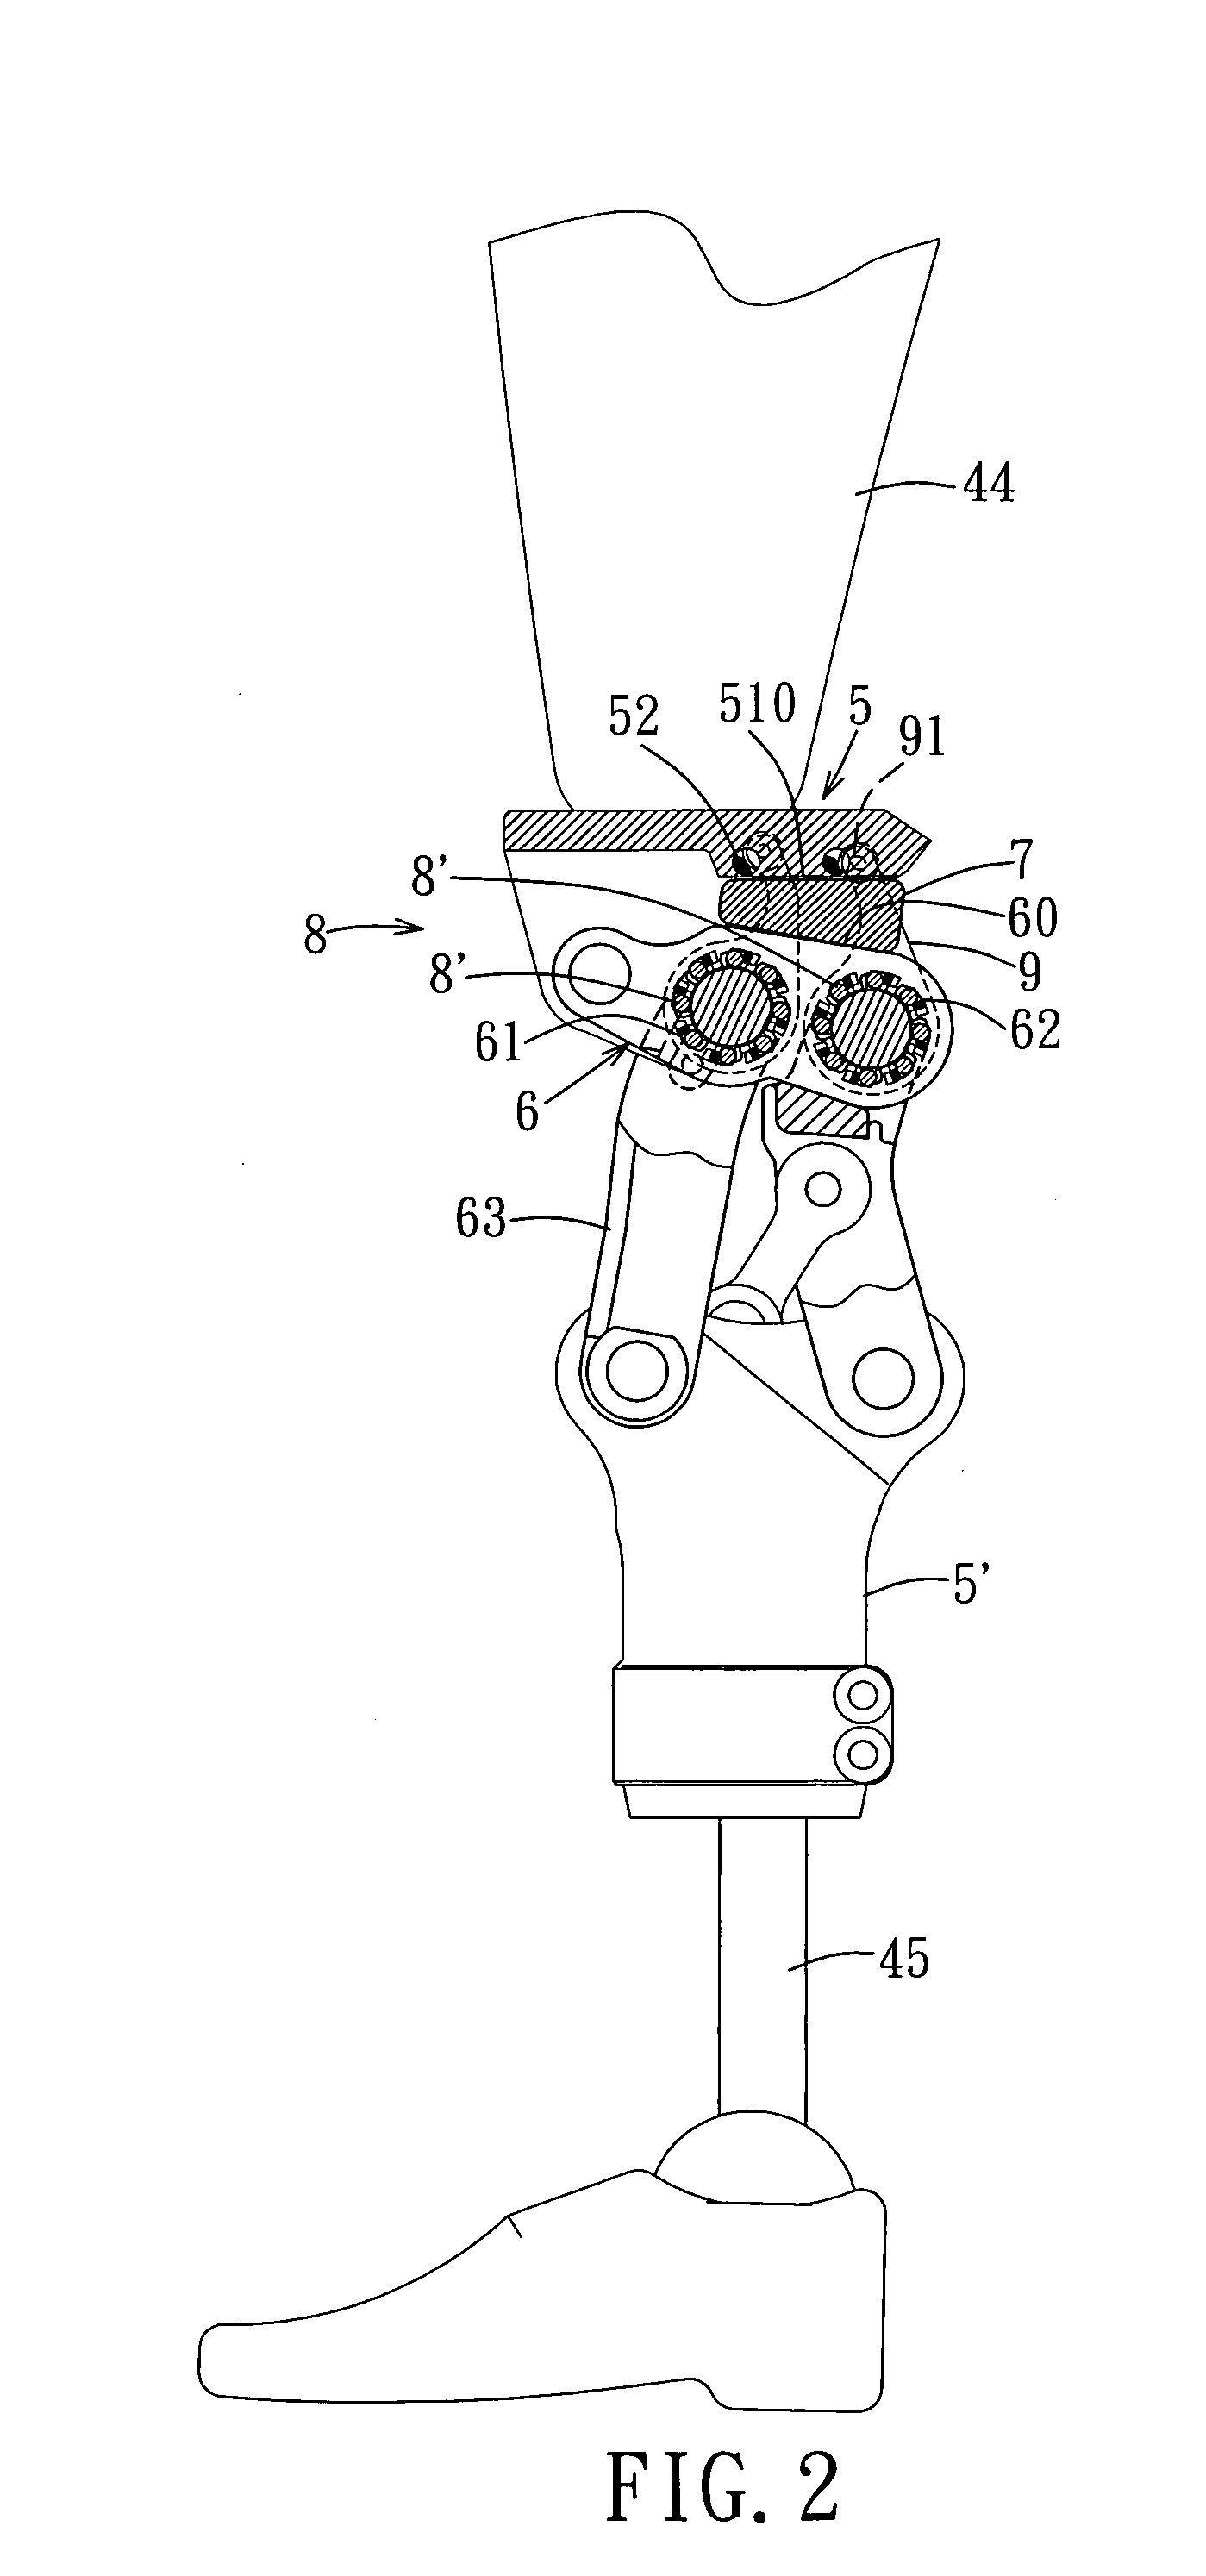 Artificial knee joint having a minimum knee angle